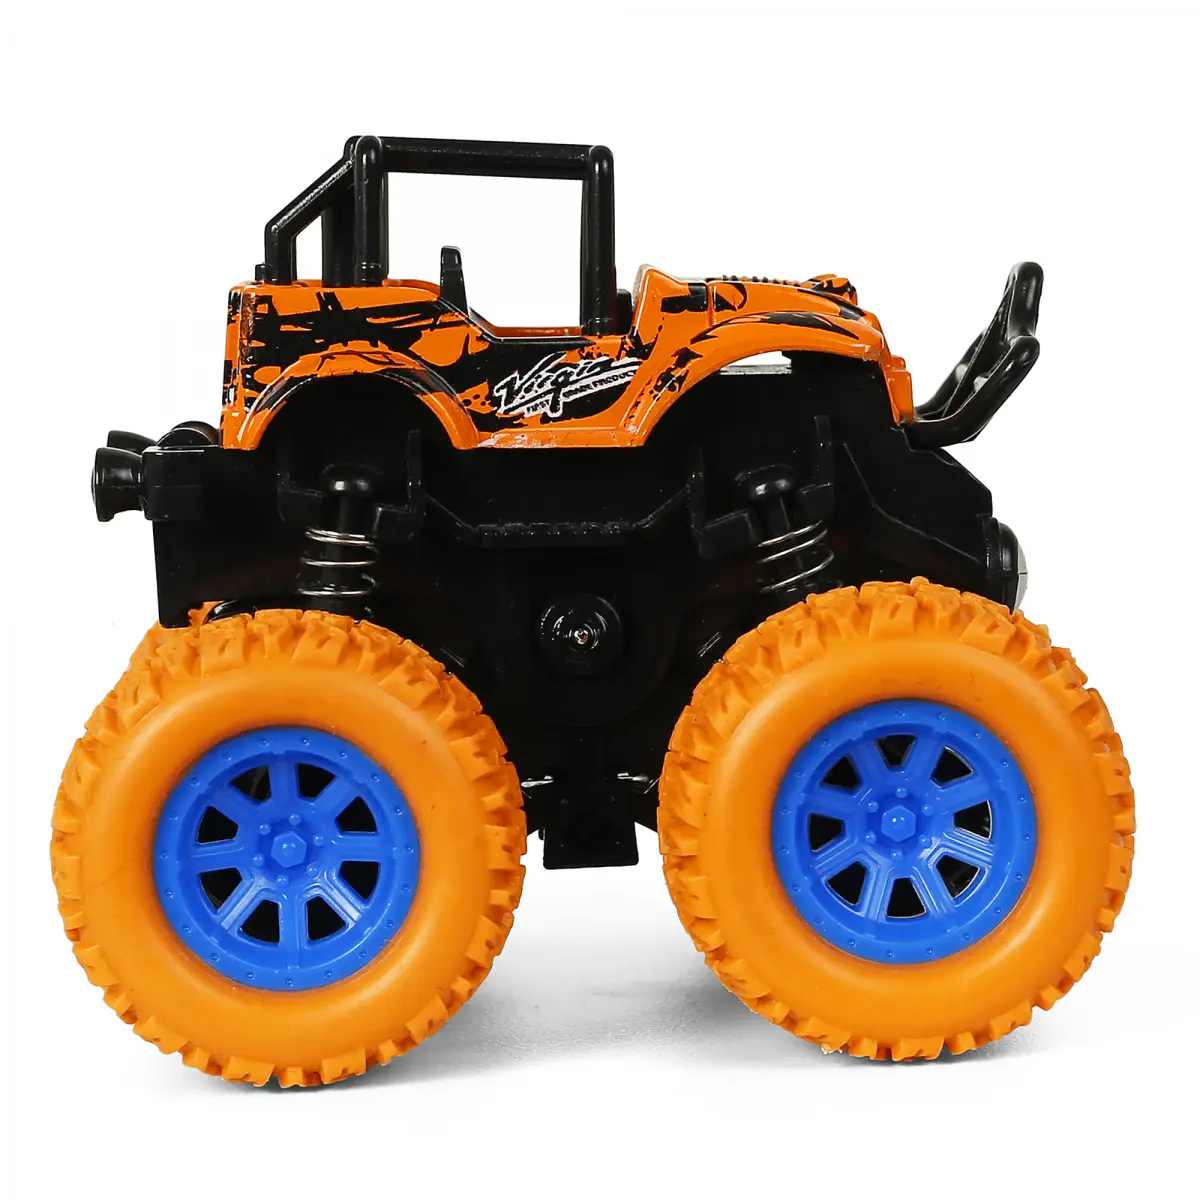 Ralleyz Pull Back Monster Friction Cars Toys Truck, Orange, 6Y+